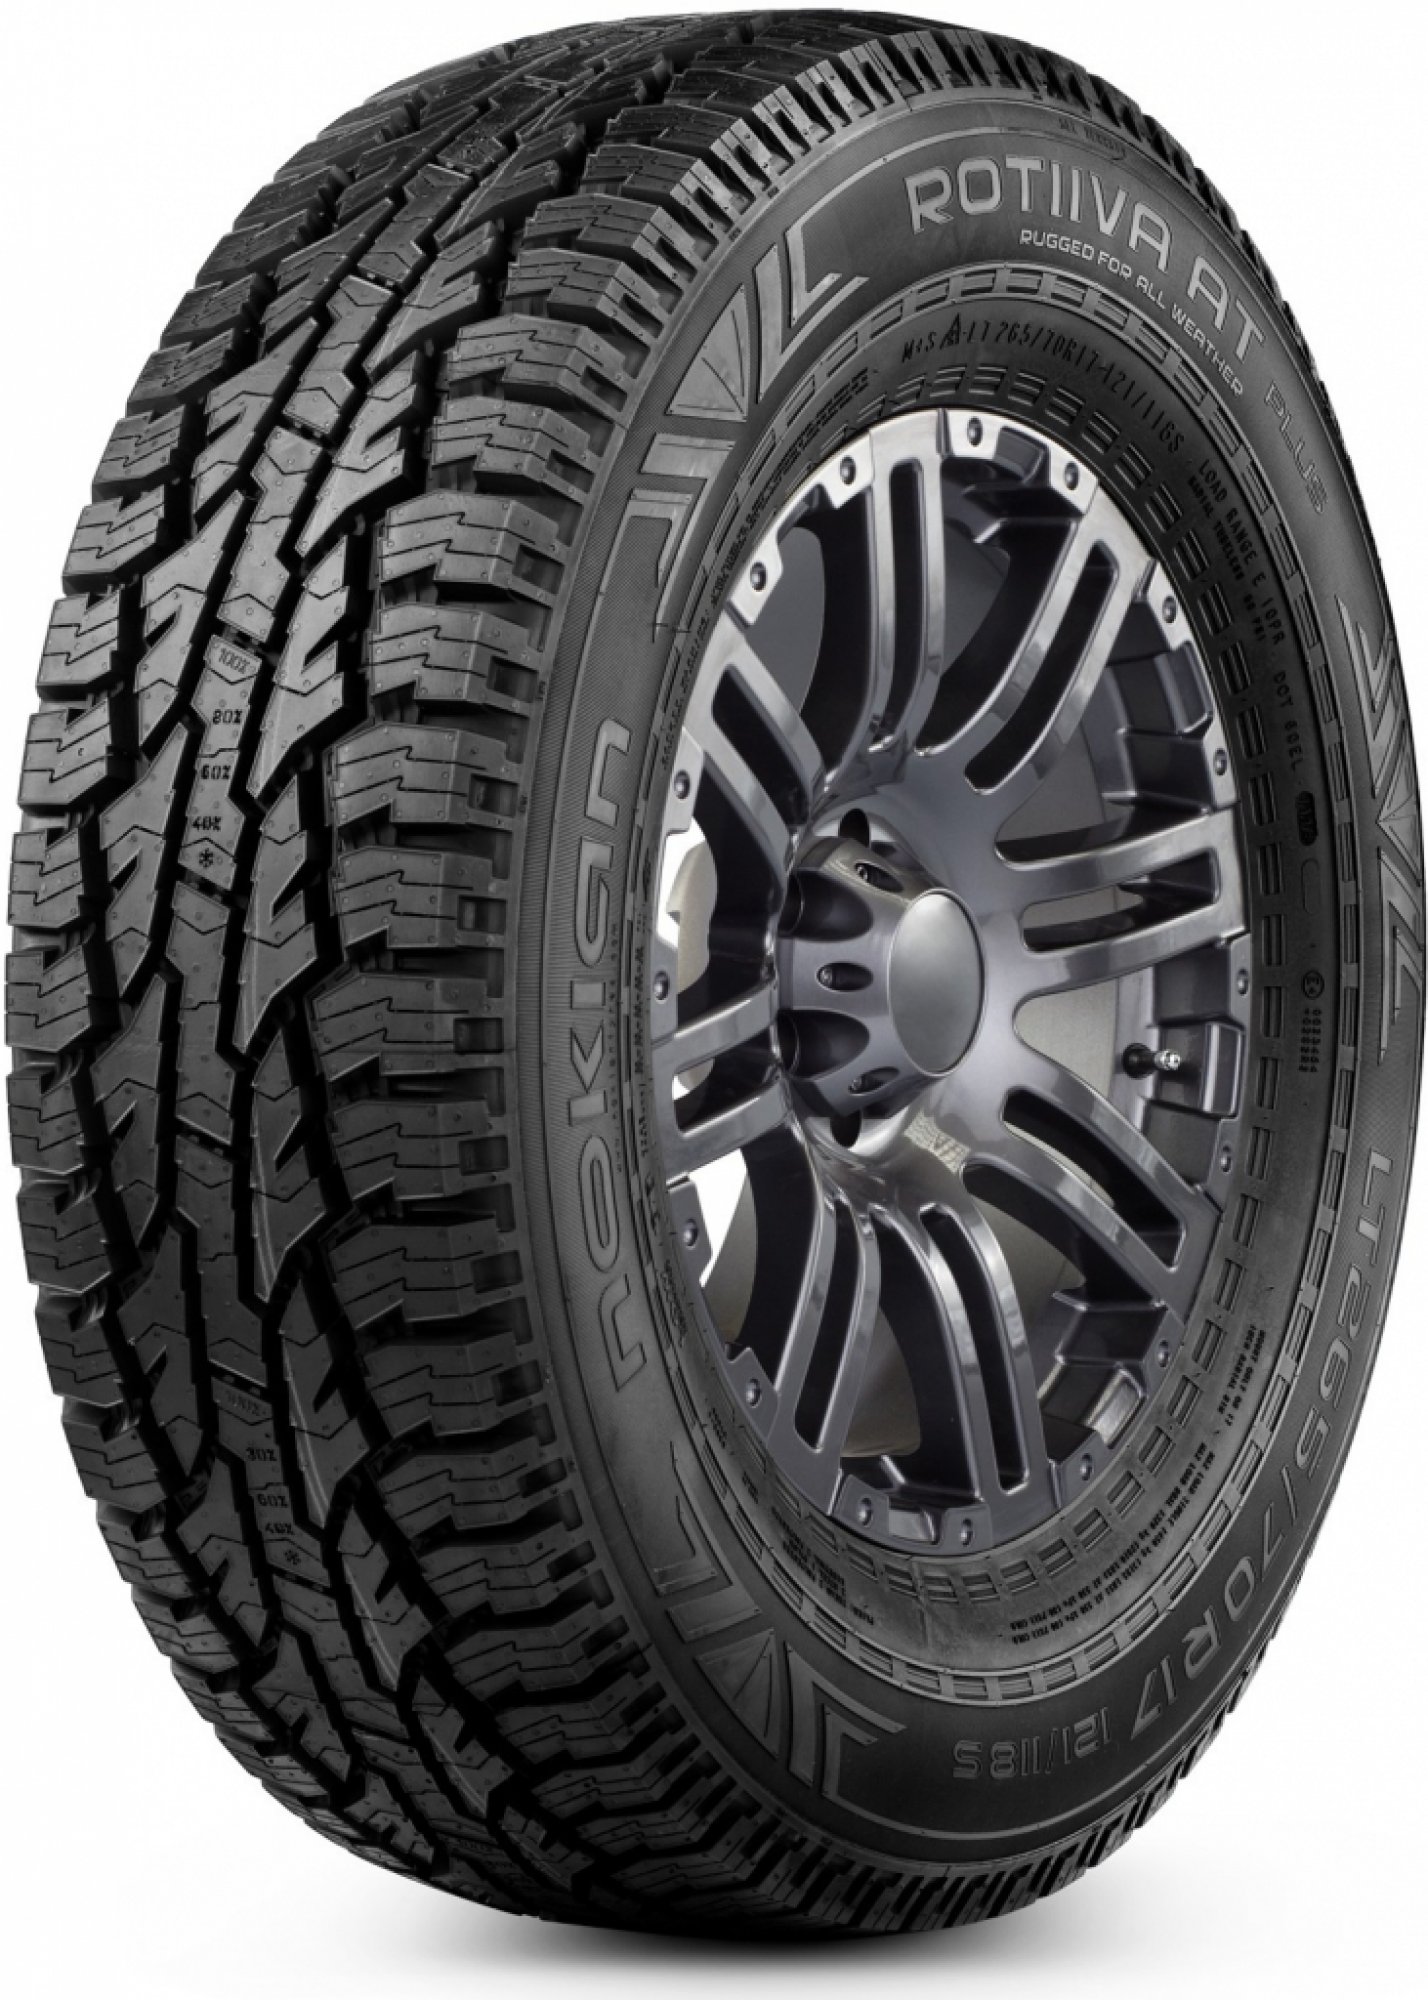 NOKIAN TYRES ROTIIVA AT PLUS 265/70 R 17 121/118S